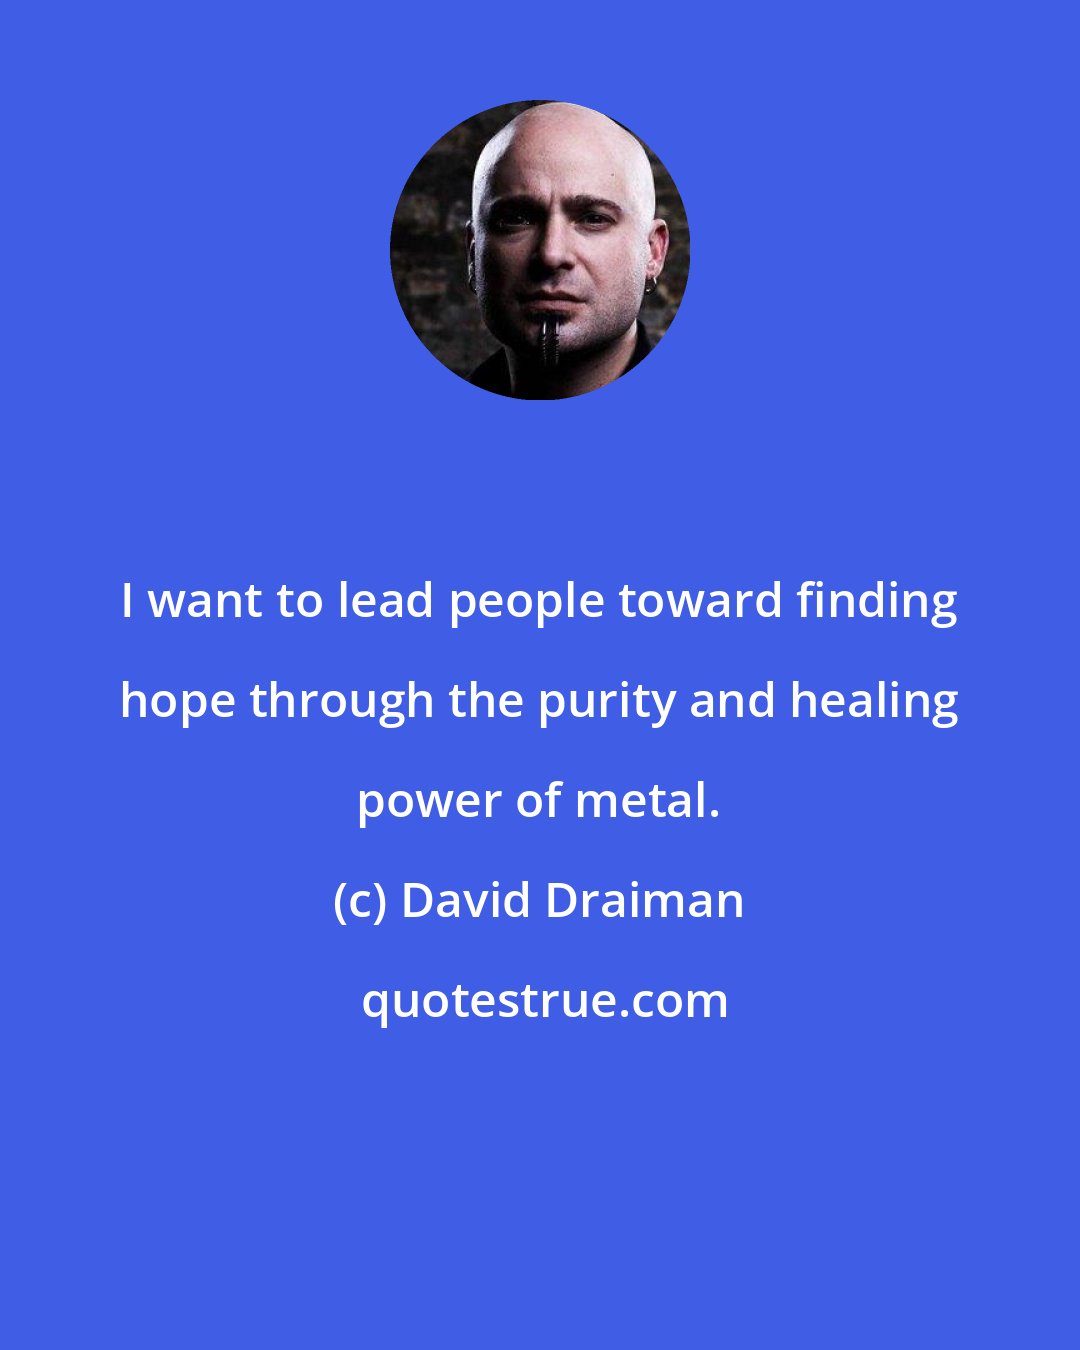 David Draiman: I want to lead people toward finding hope through the purity and healing power of metal.